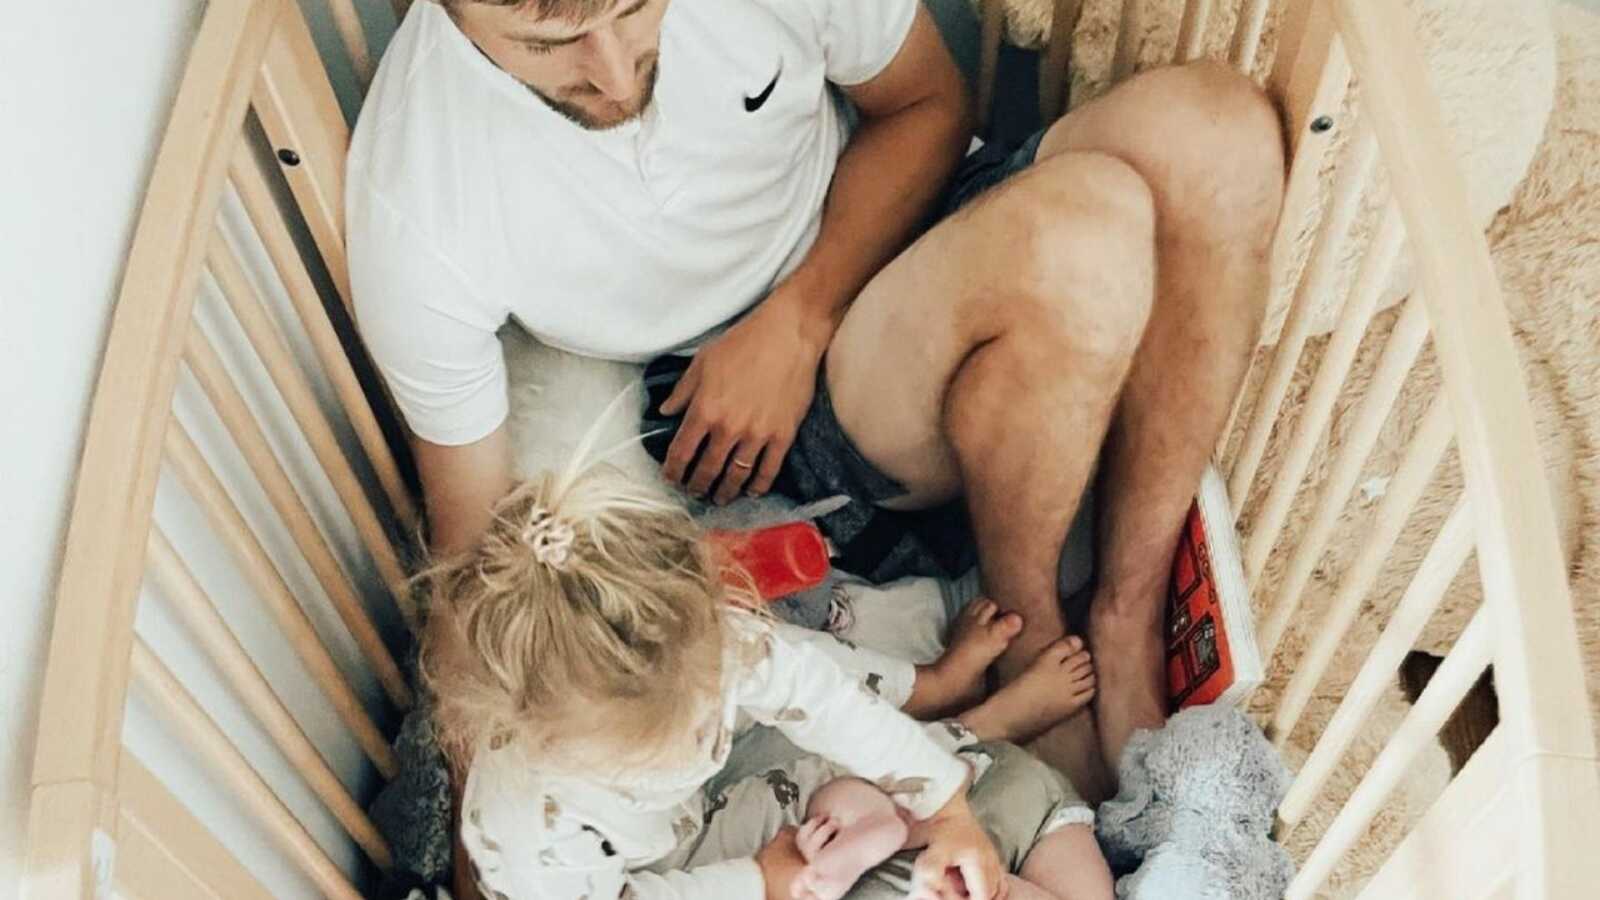 dad in the crib with his two kids